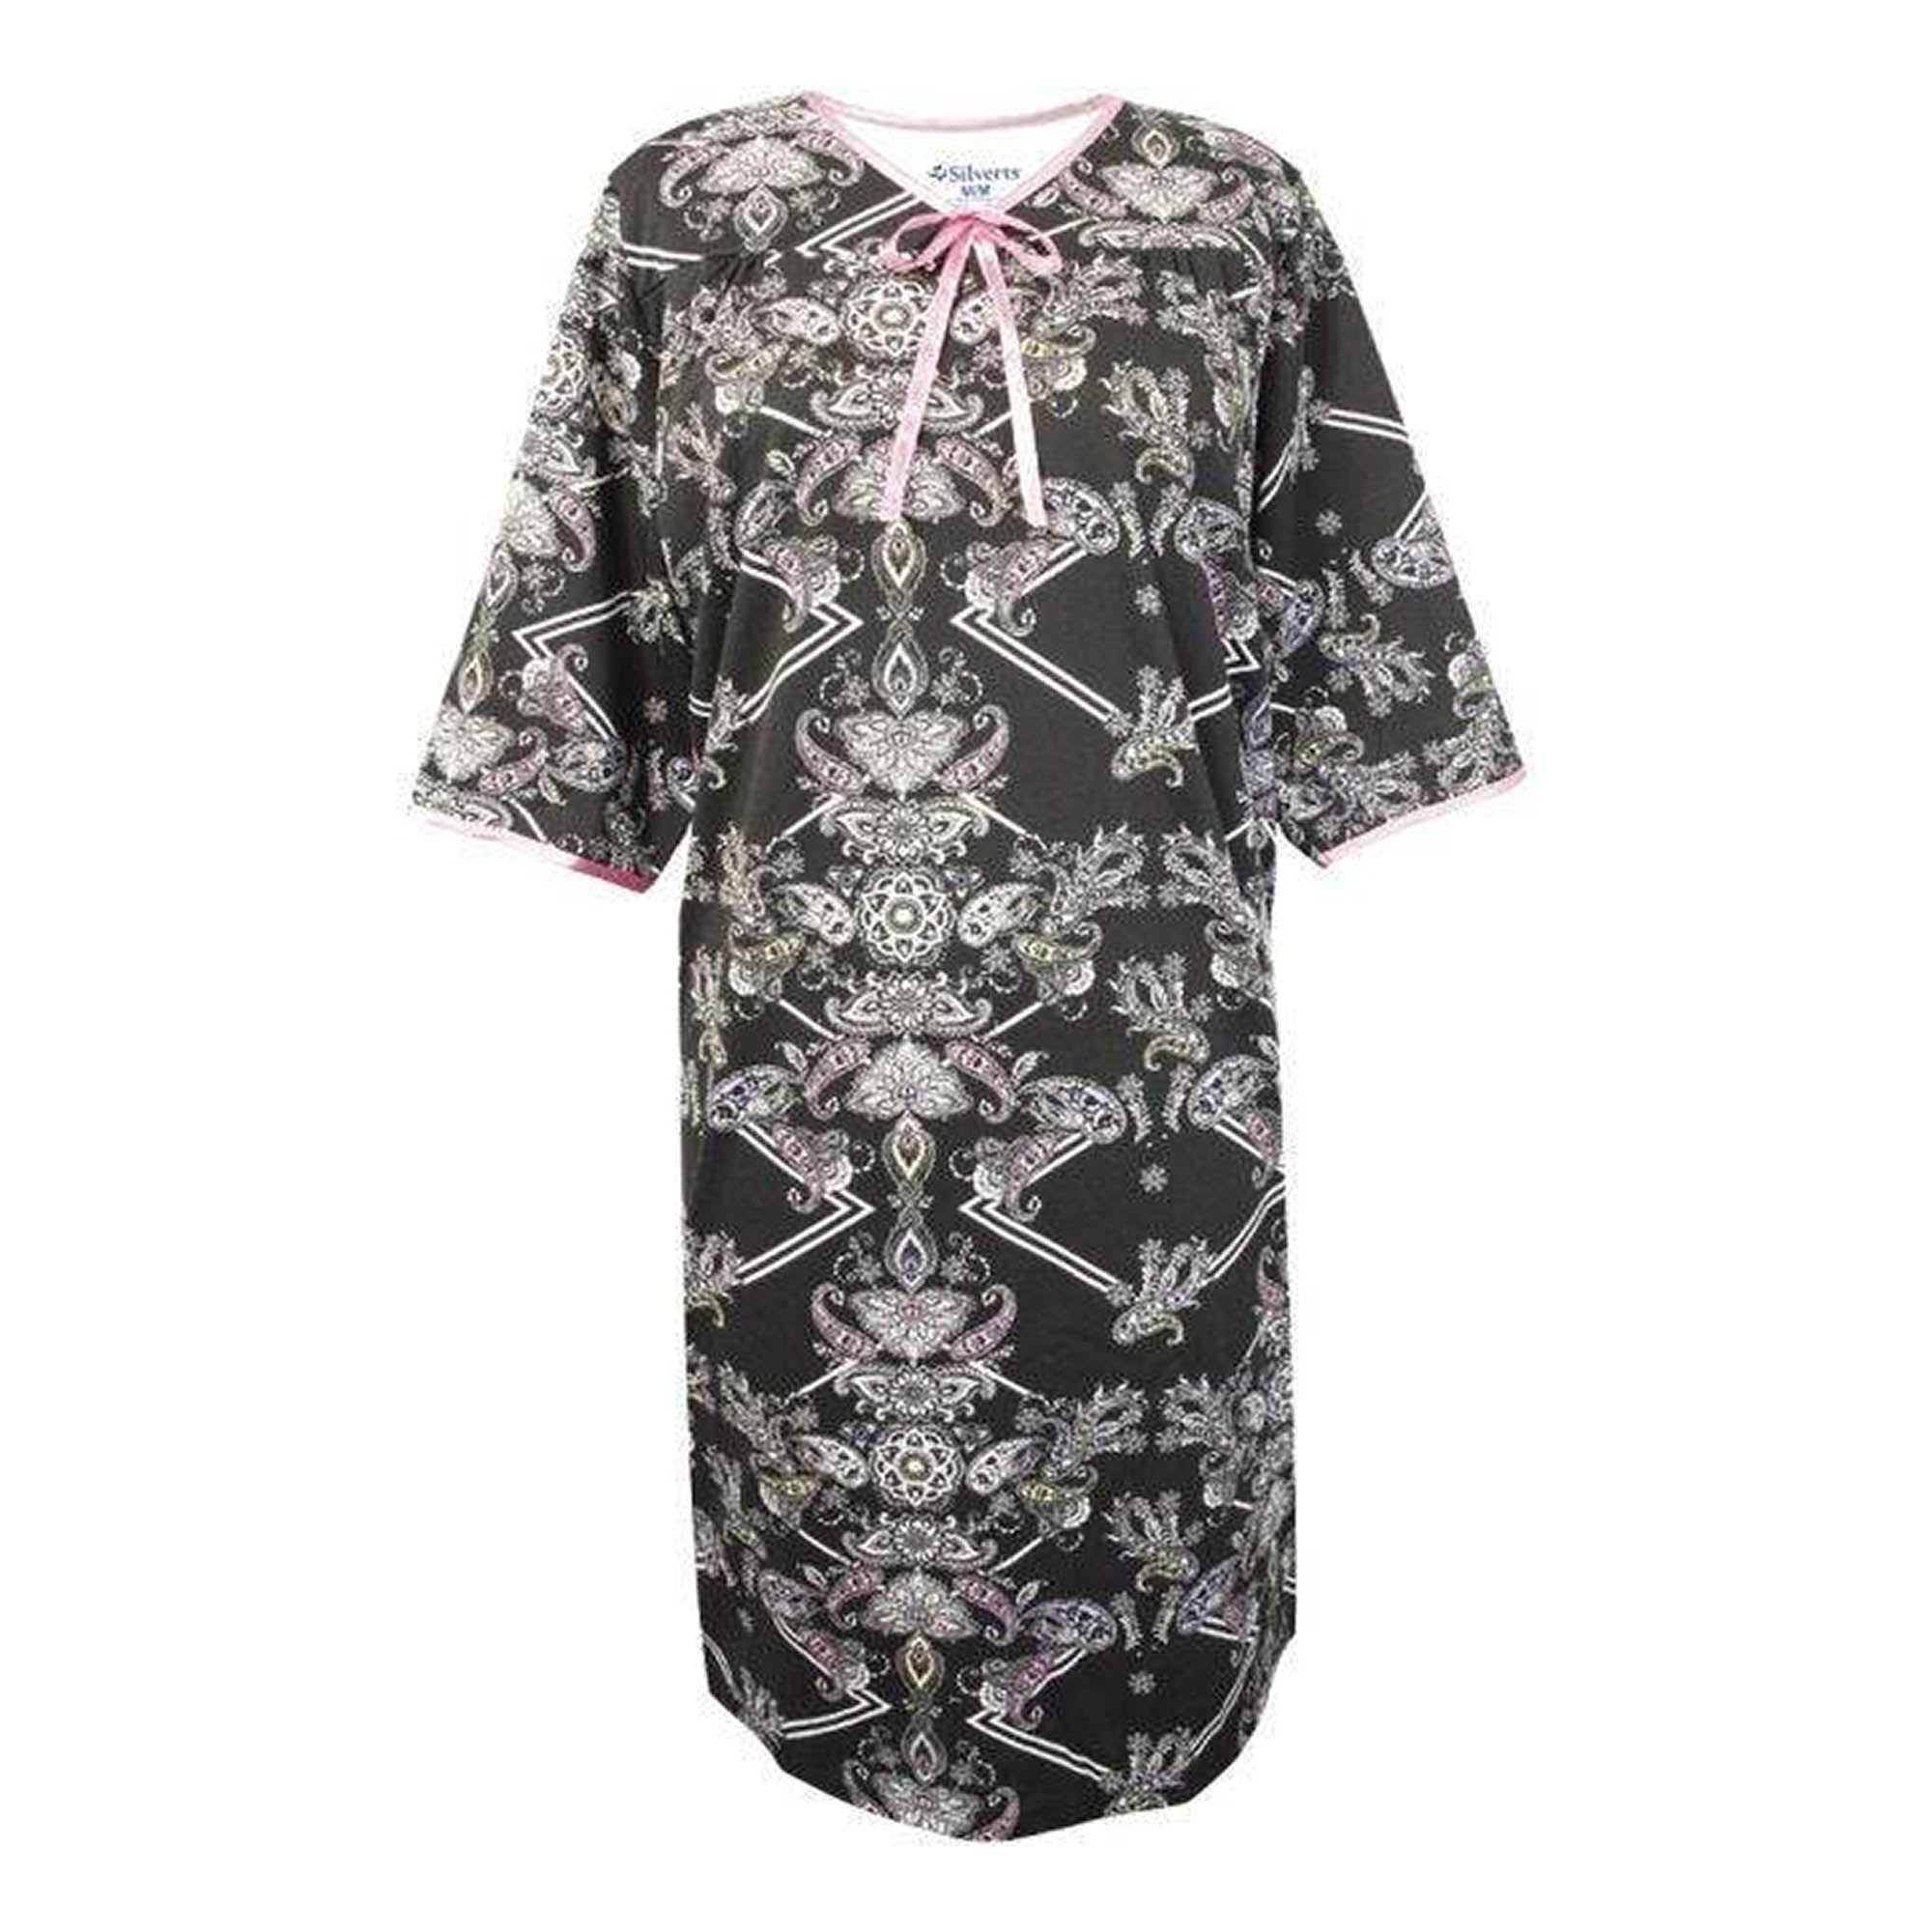 Silverts Women's Open Back Antimicrobial Nightgown - Adaptive Clothing - Perfect Paisley - S